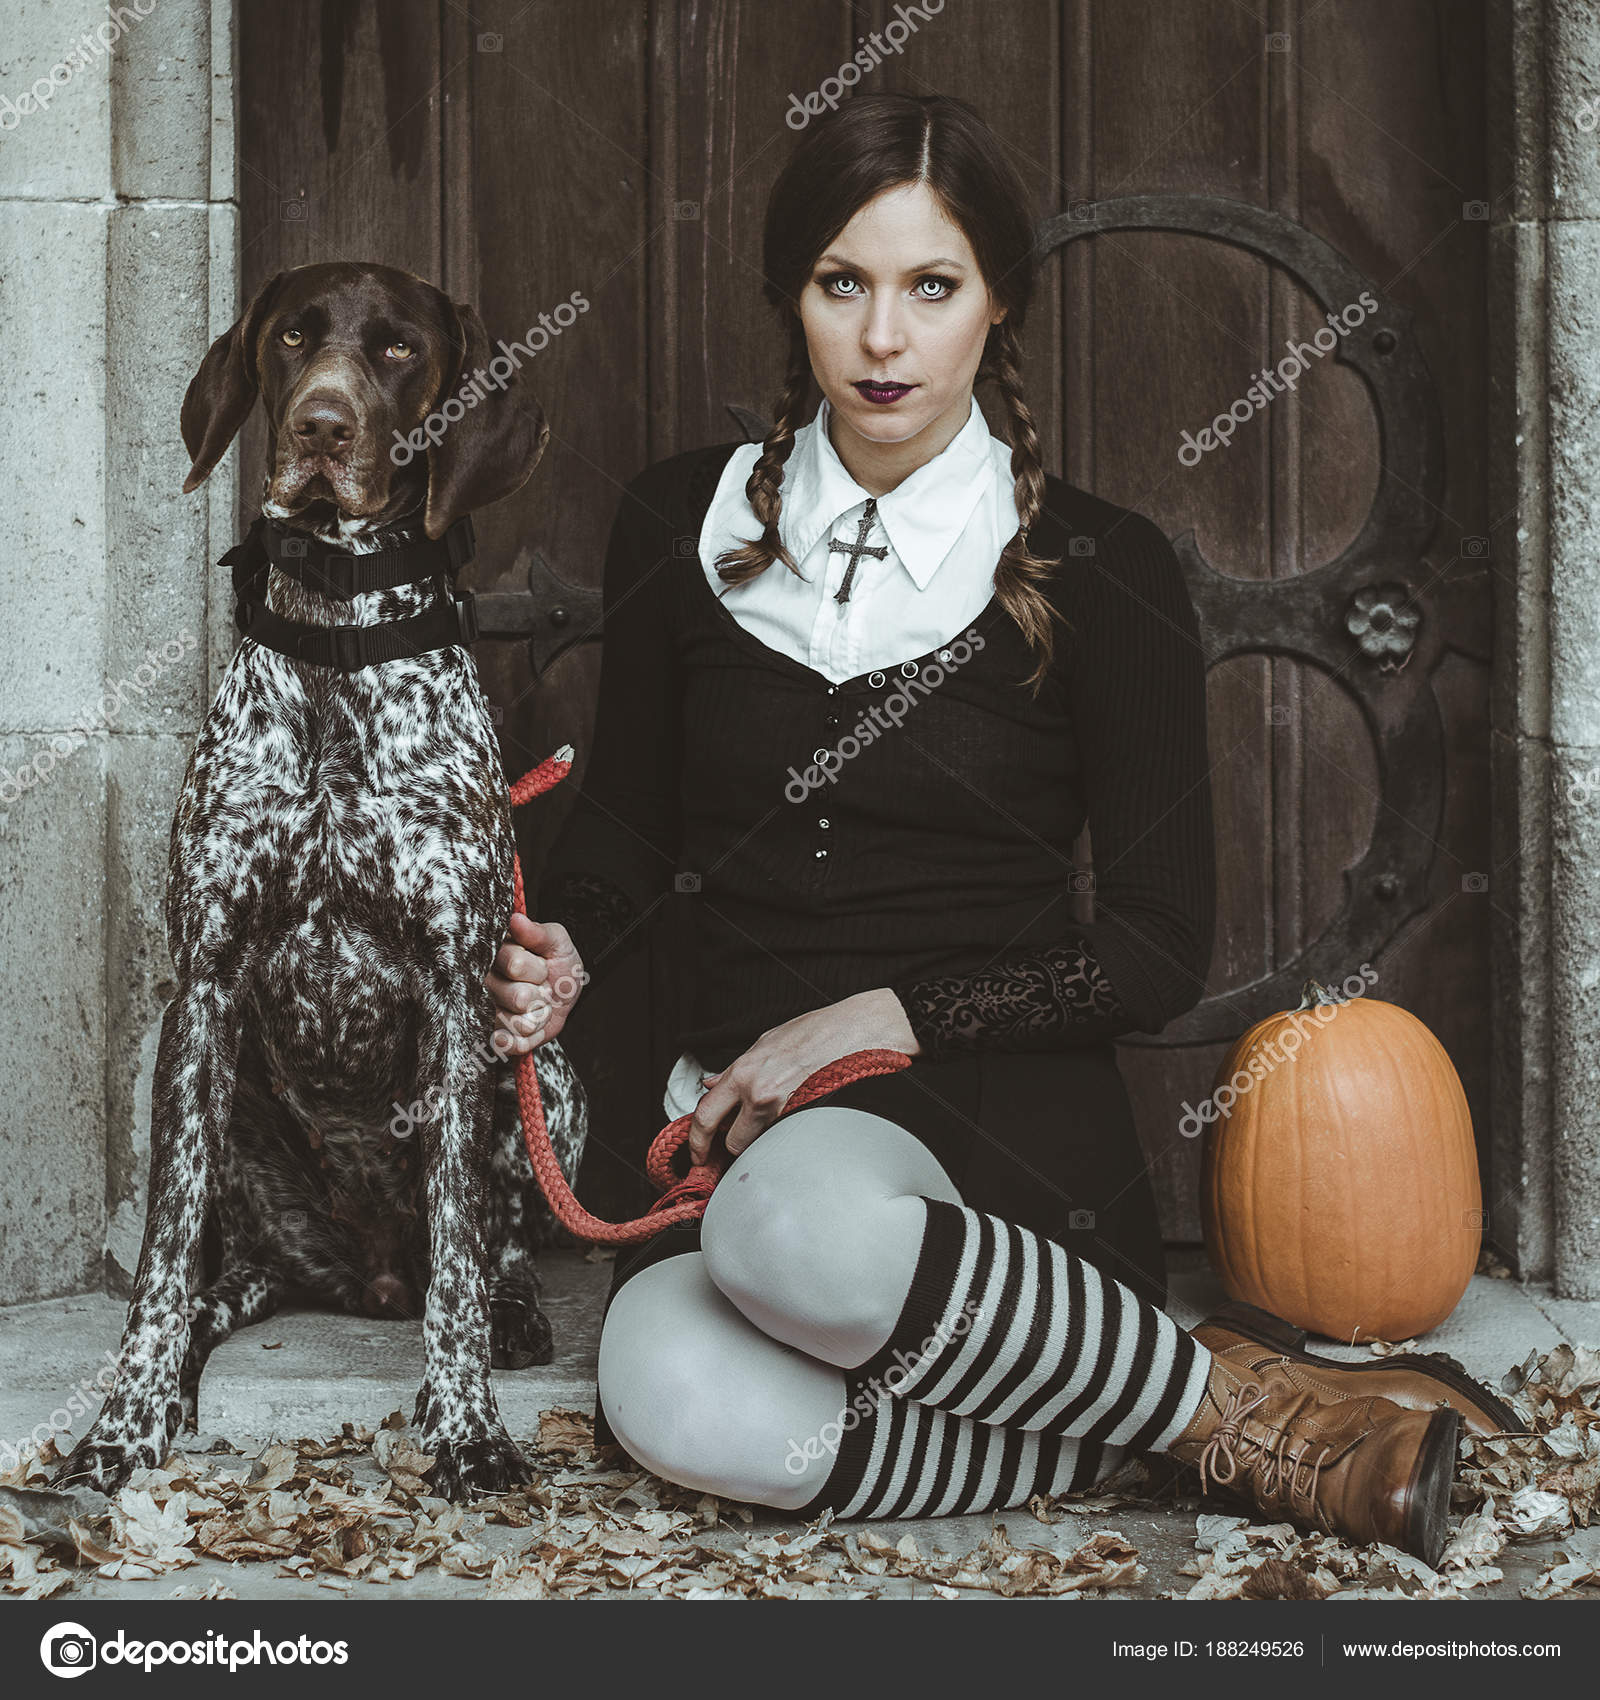 Pictures Scary Female Halloween Costumes Creepy Woman Her Dog